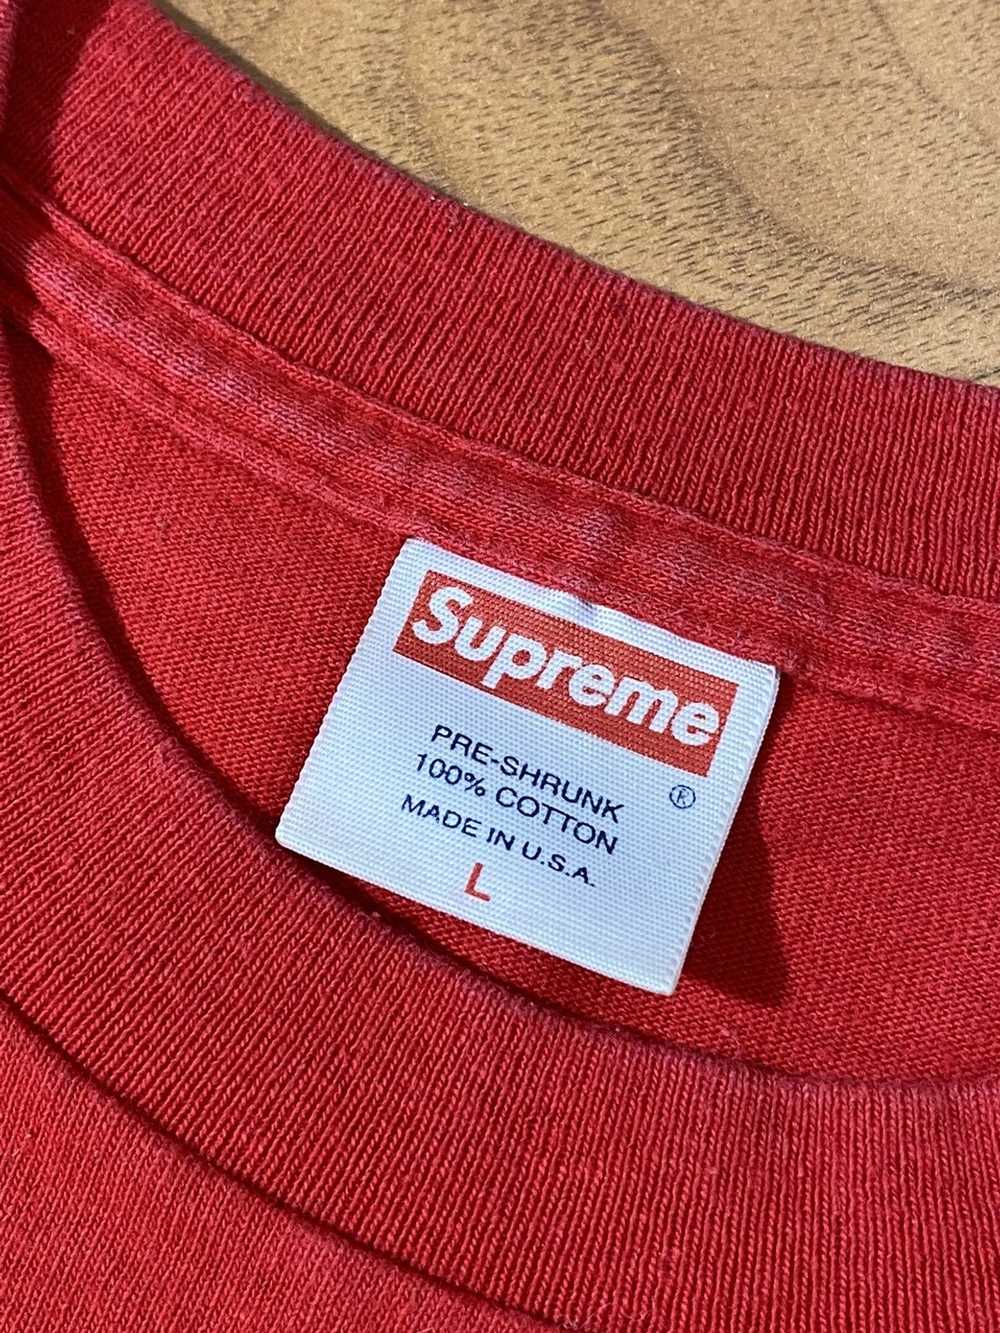 Supreme Vintage tee 2003 T-shirts Red Made In USA Large XL